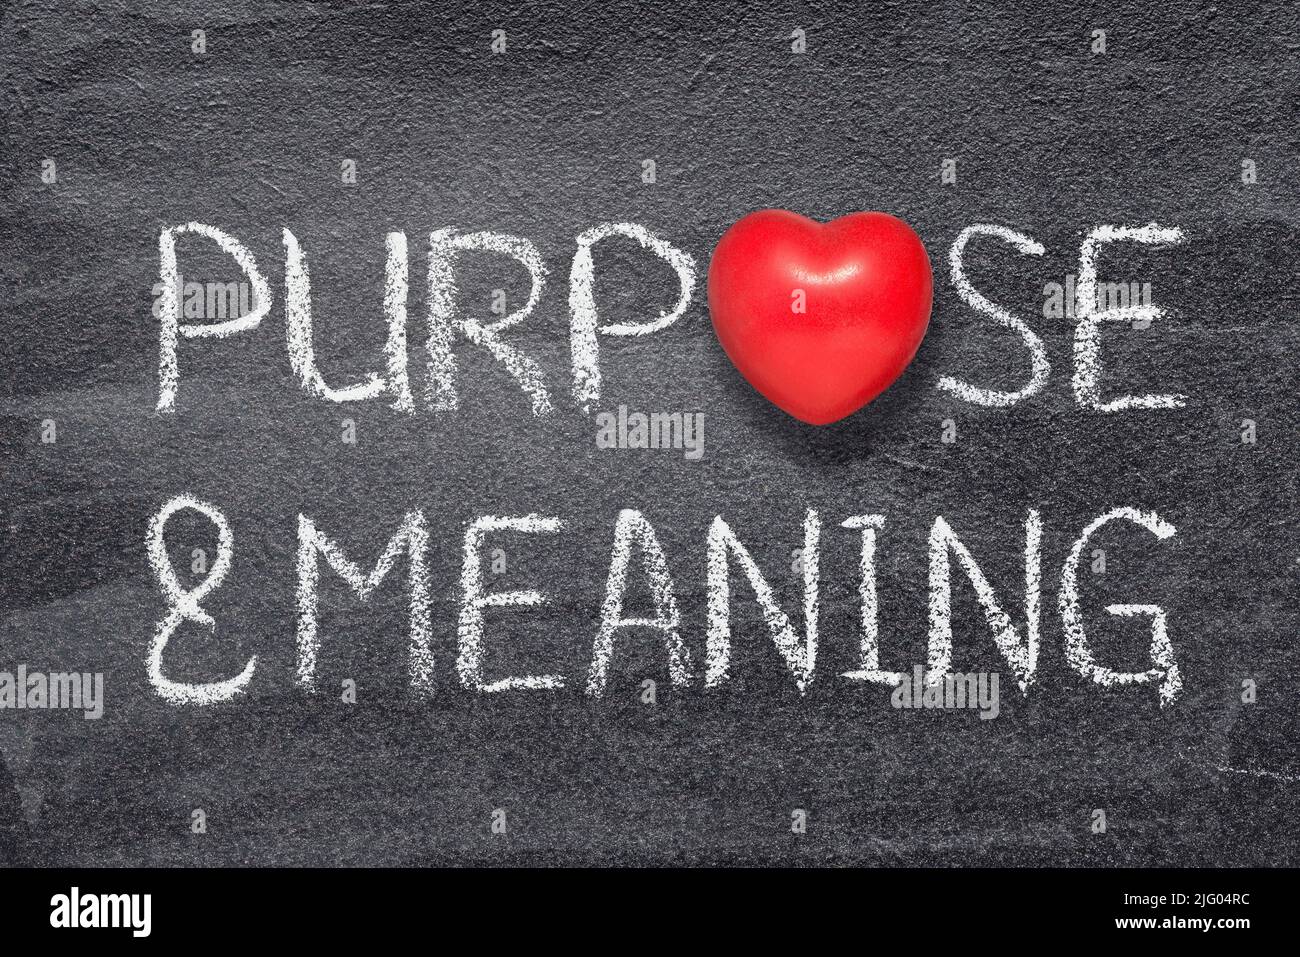 purpose and meaning words written on chalkboard with red heart symbol Stock Photo